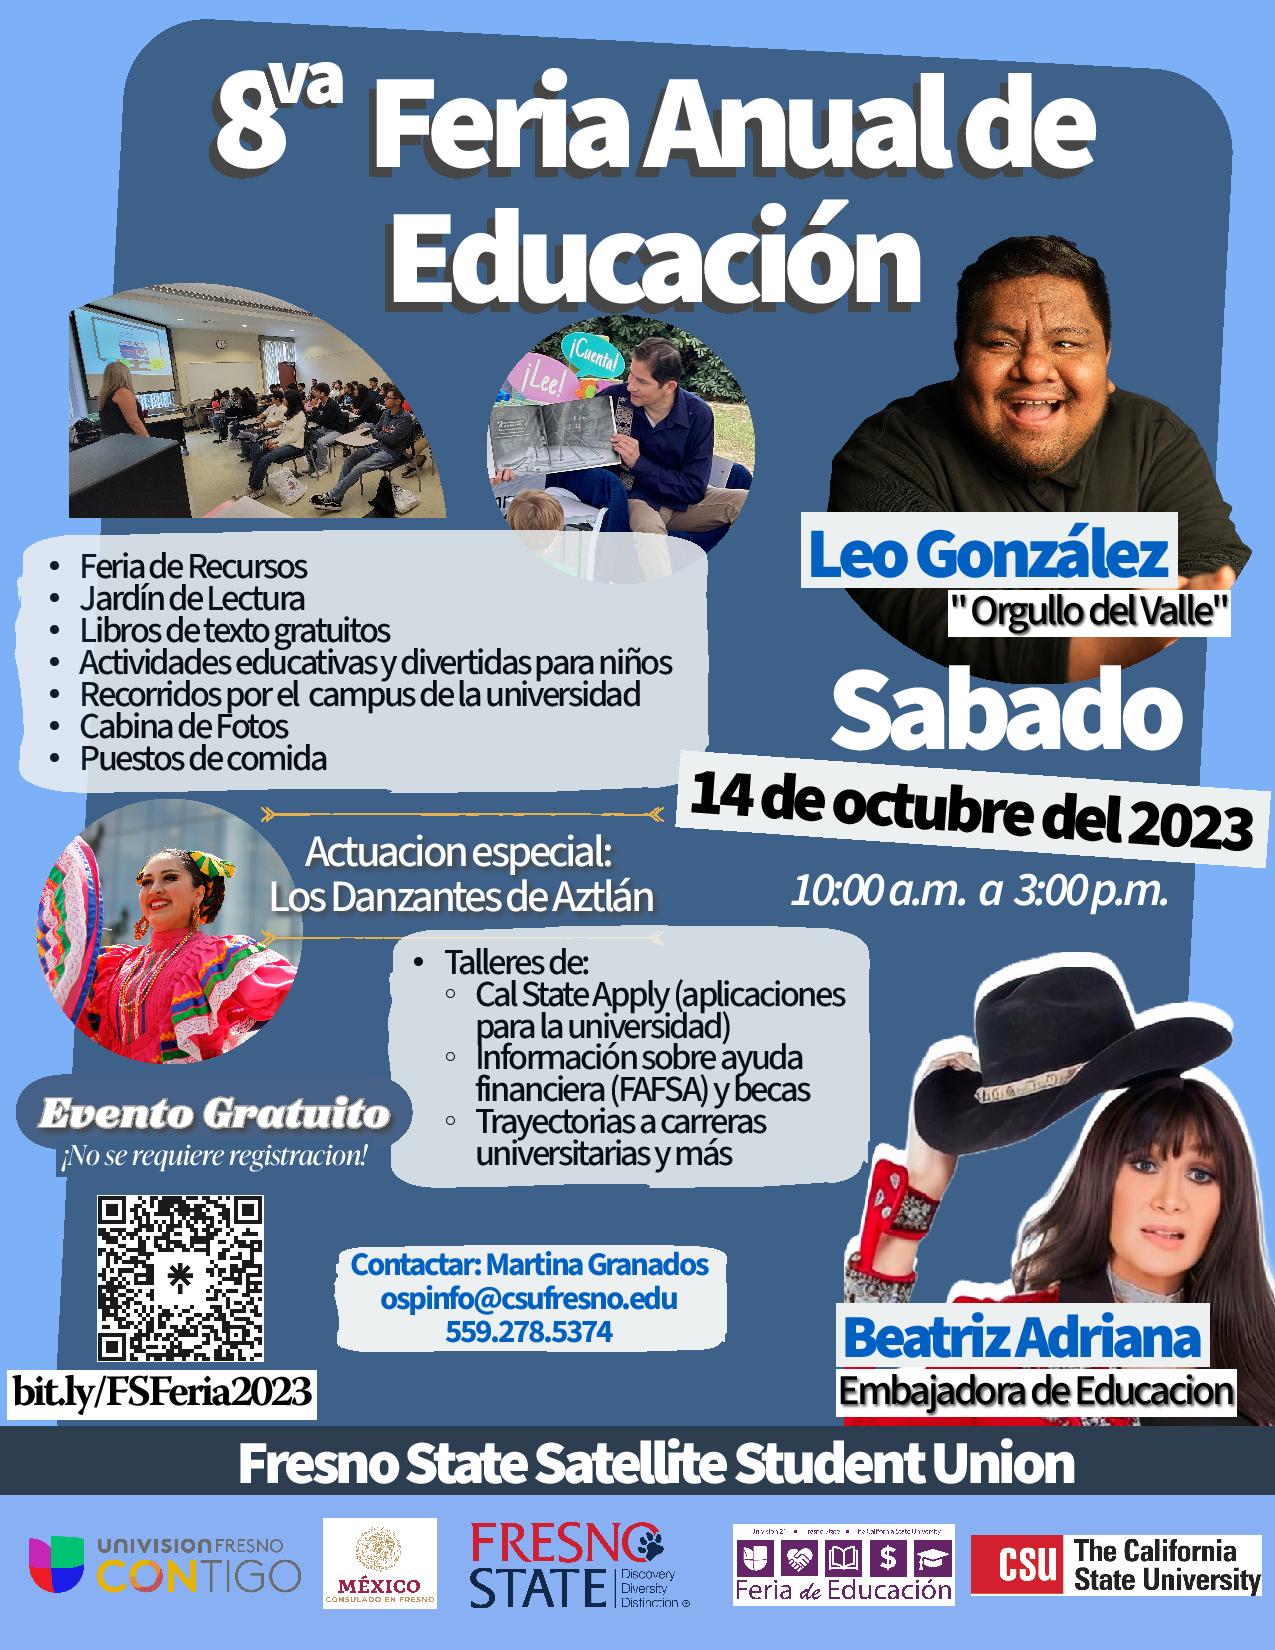 fresno state feria flyer event held on saturday, october 14, 2023 from 10 am to 3pm at the satellite student union